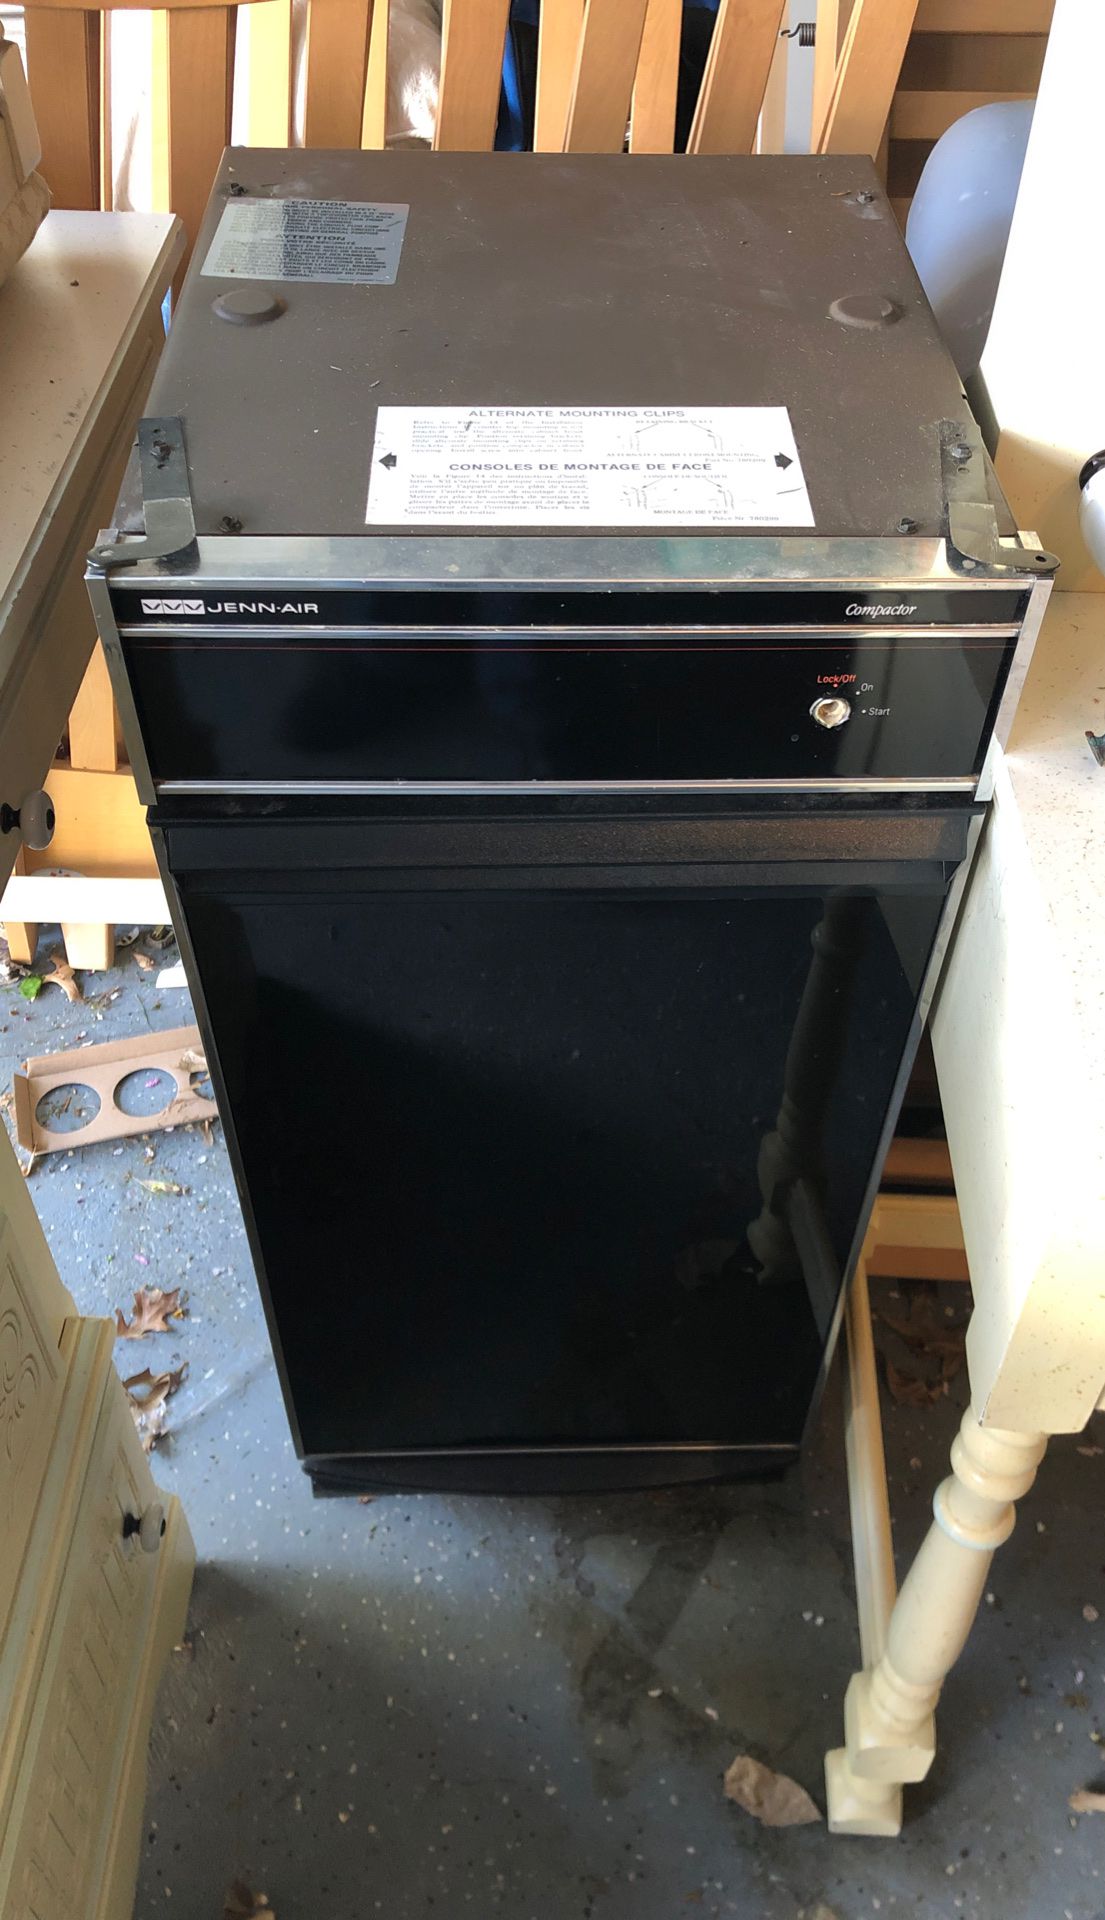 Jenn Air 15 wide trash compactor. Worked but knob broke and we replaced with a mini fridge.